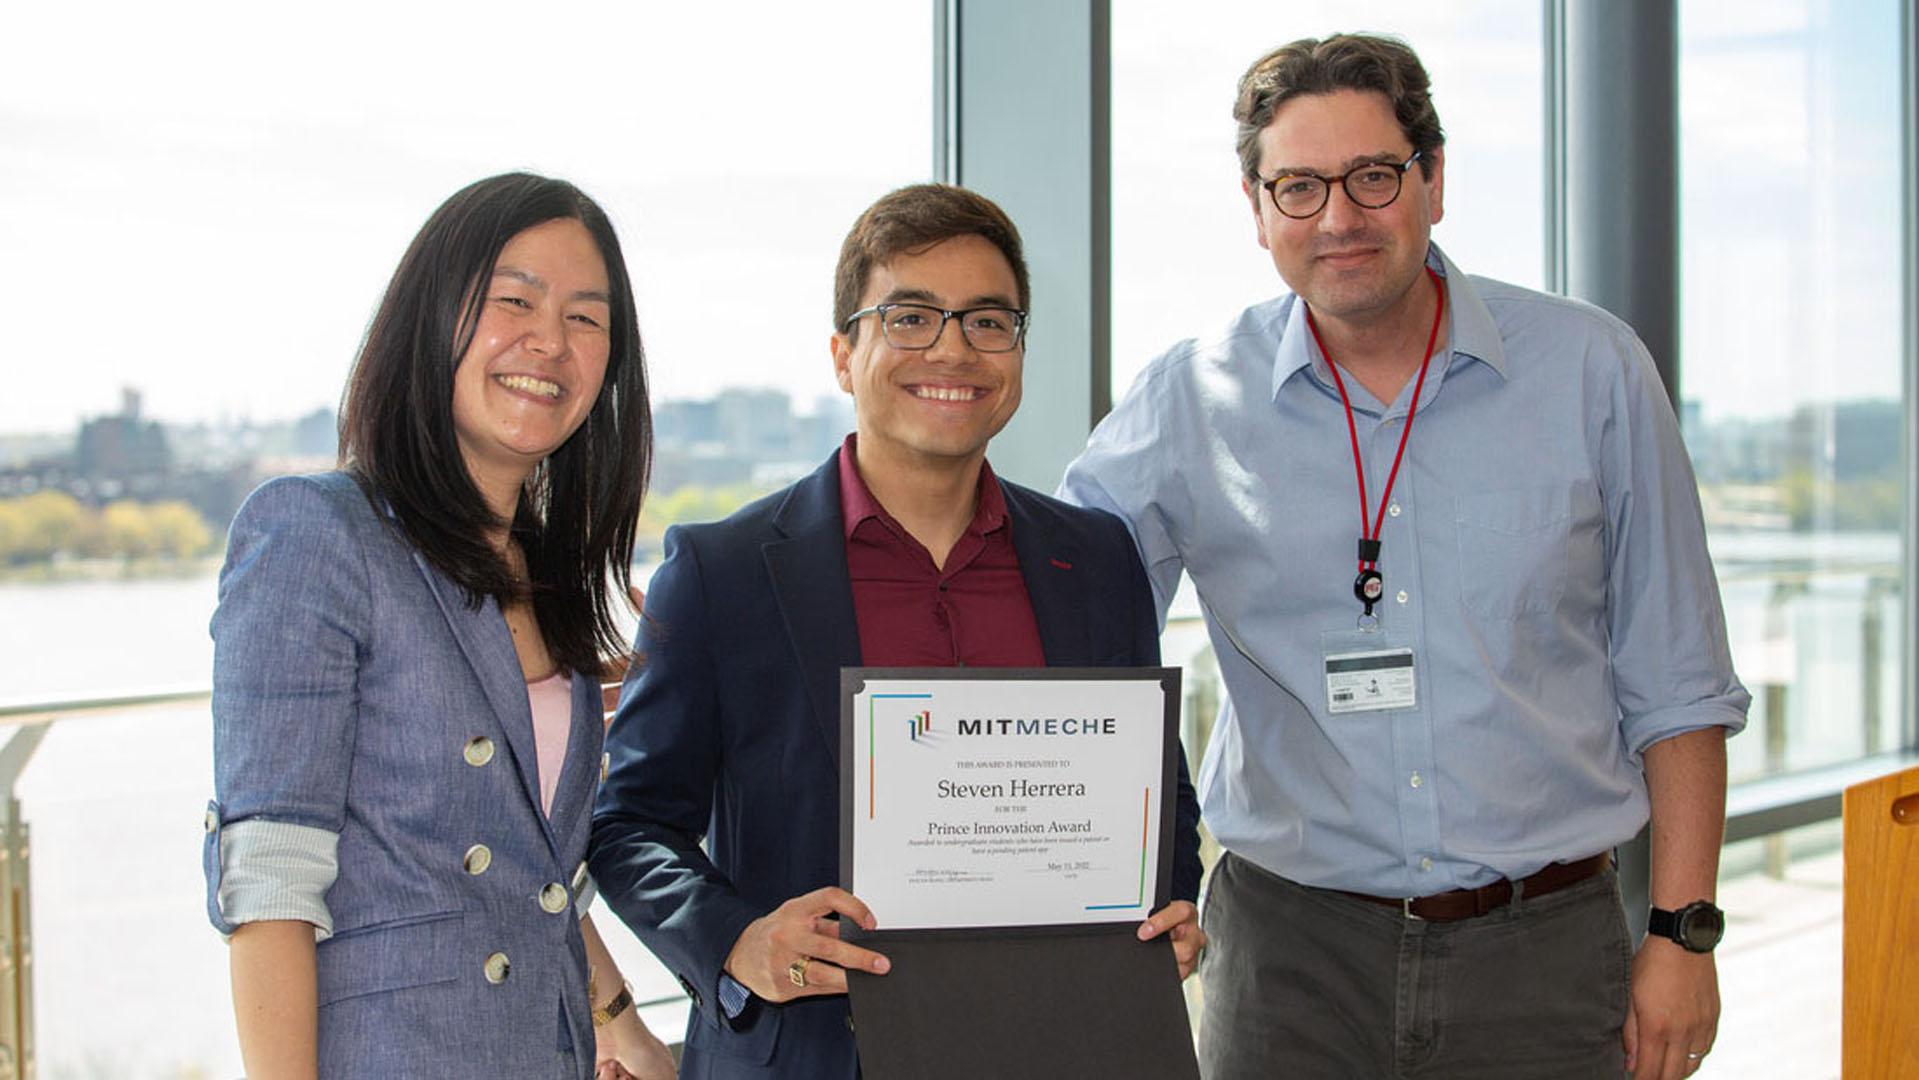 On May 11, MechE hosted the first in-person Student Awards Luncheon in 3 years! Students, faculty, and staff gathered in Samberg Conference Center to celebrate the accomplishments of MechE students.